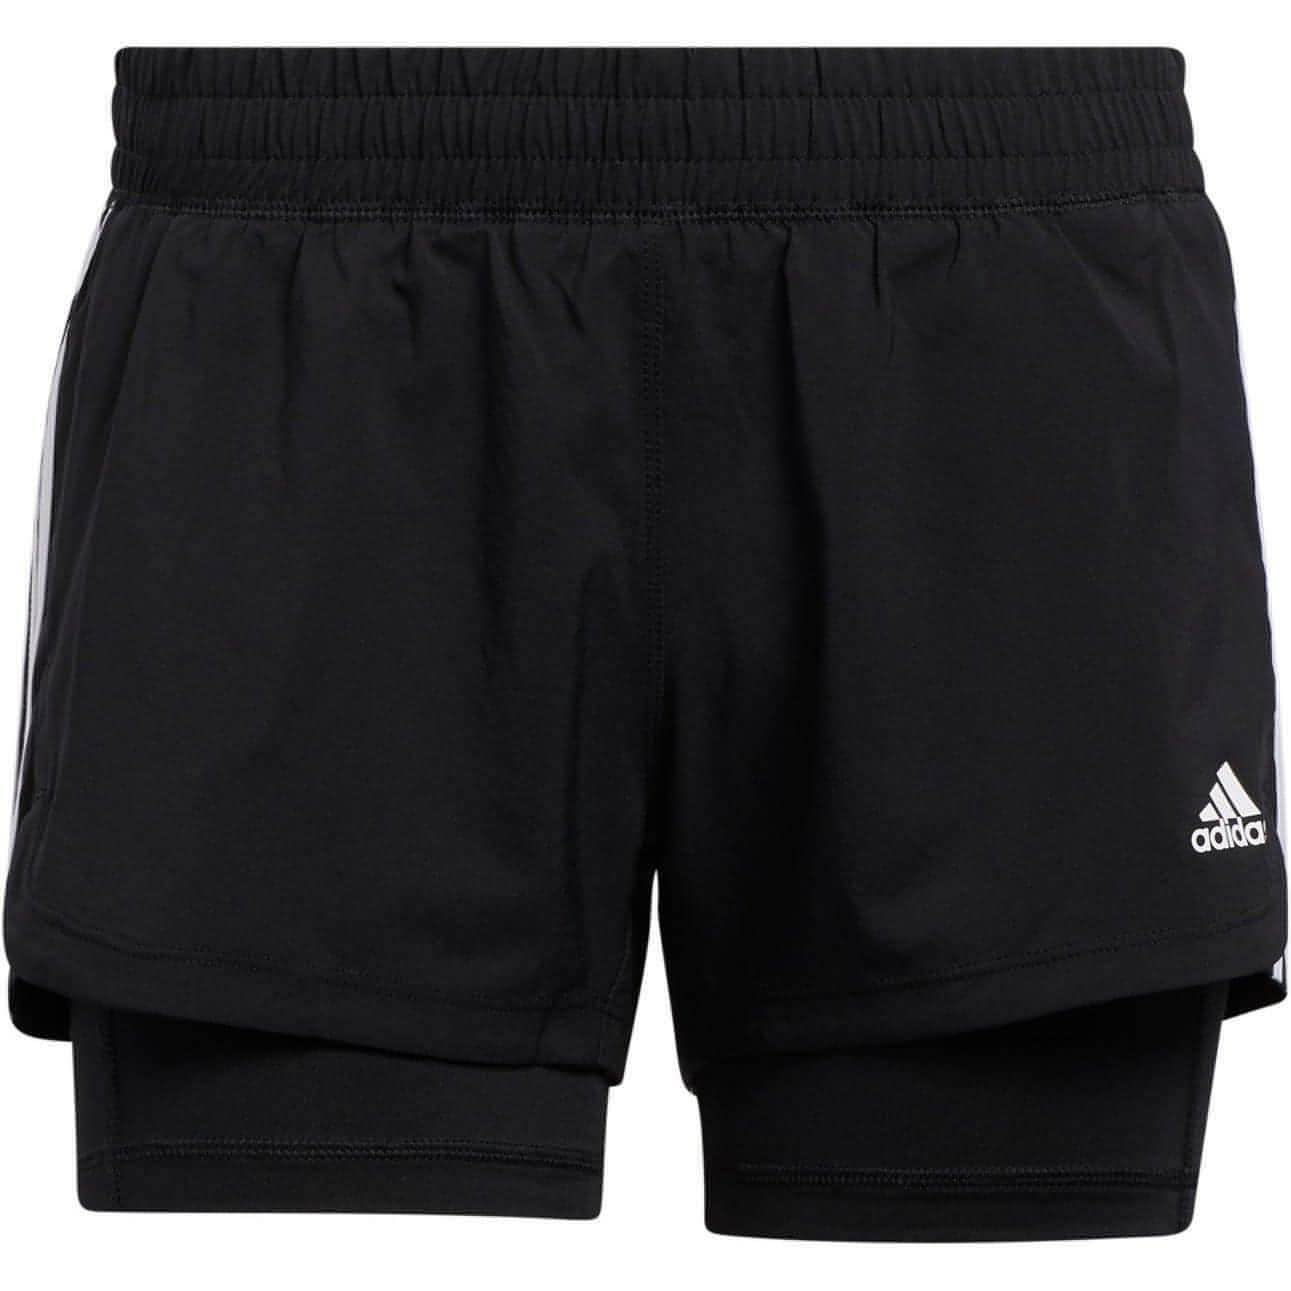 adidas Pacer 3 Stripes Woven 2 In 1 Womens Training Shorts - Black - Start Fitness